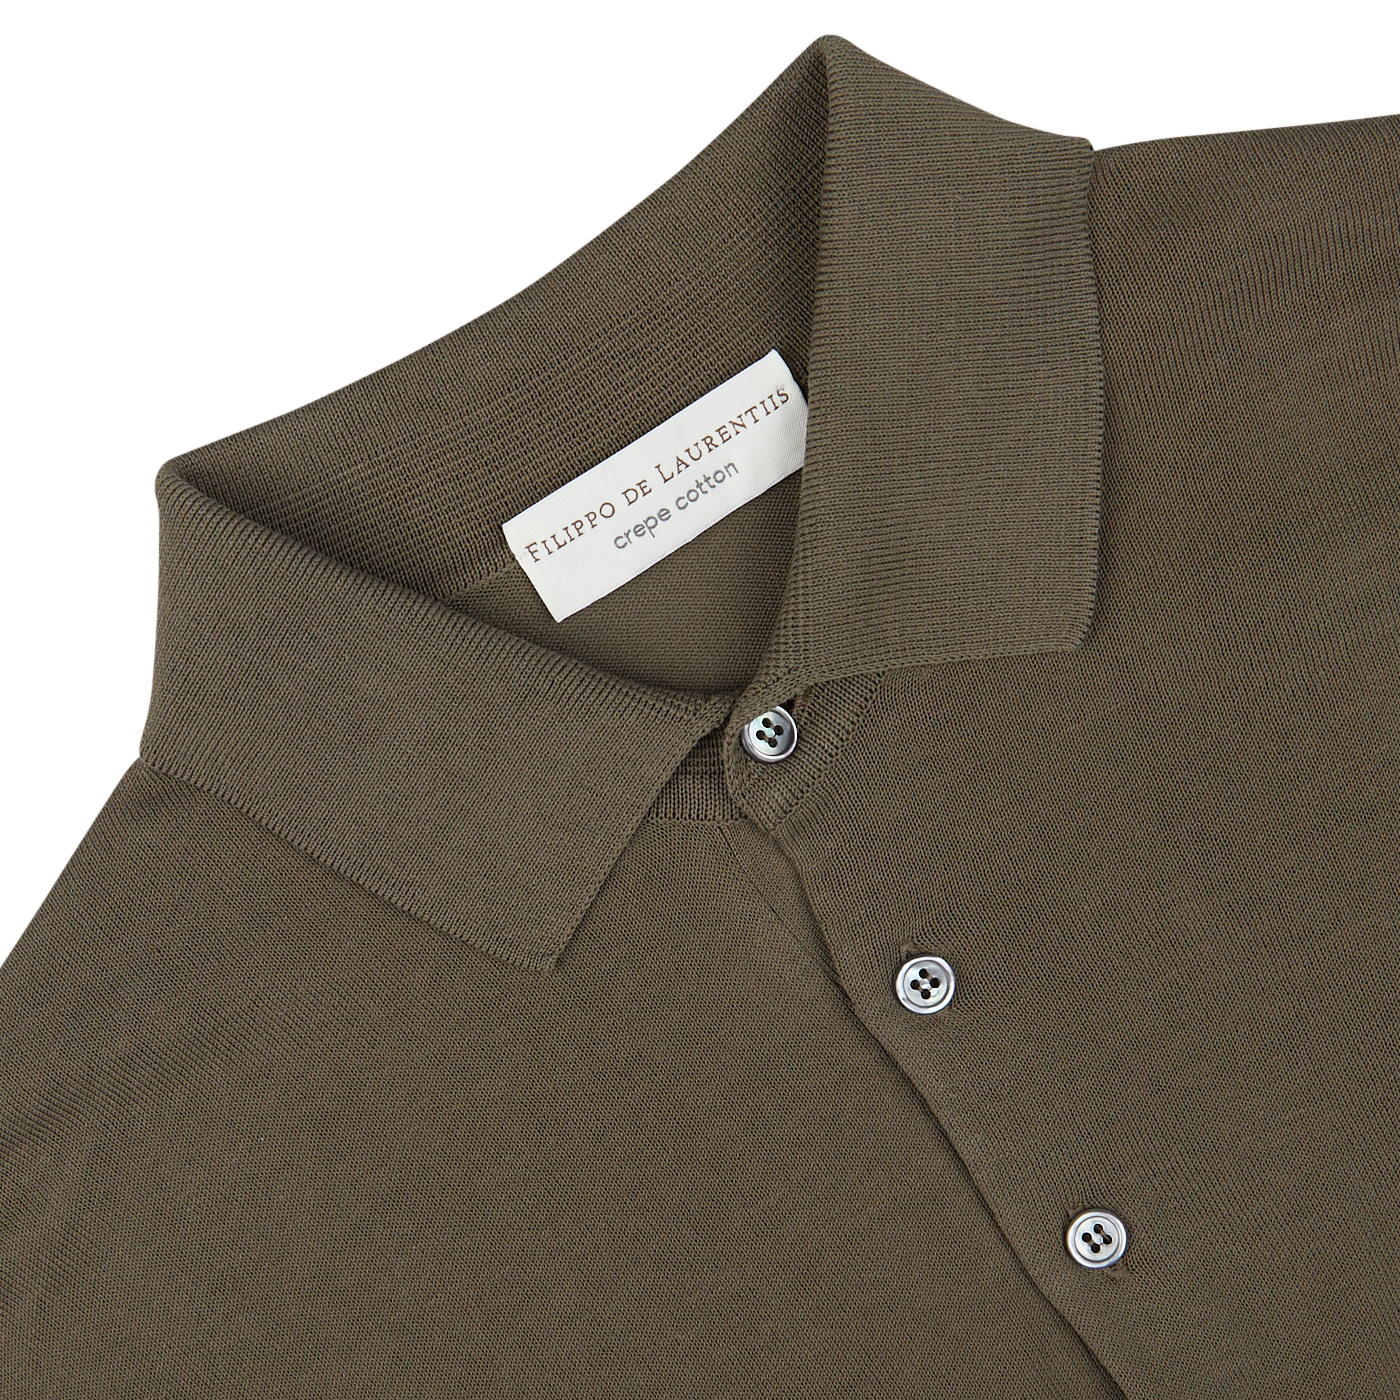 Olive green crepe cotton Filippo de Laurentiis polo shirt with a close-up of the collar and button placket, displaying its designer label.